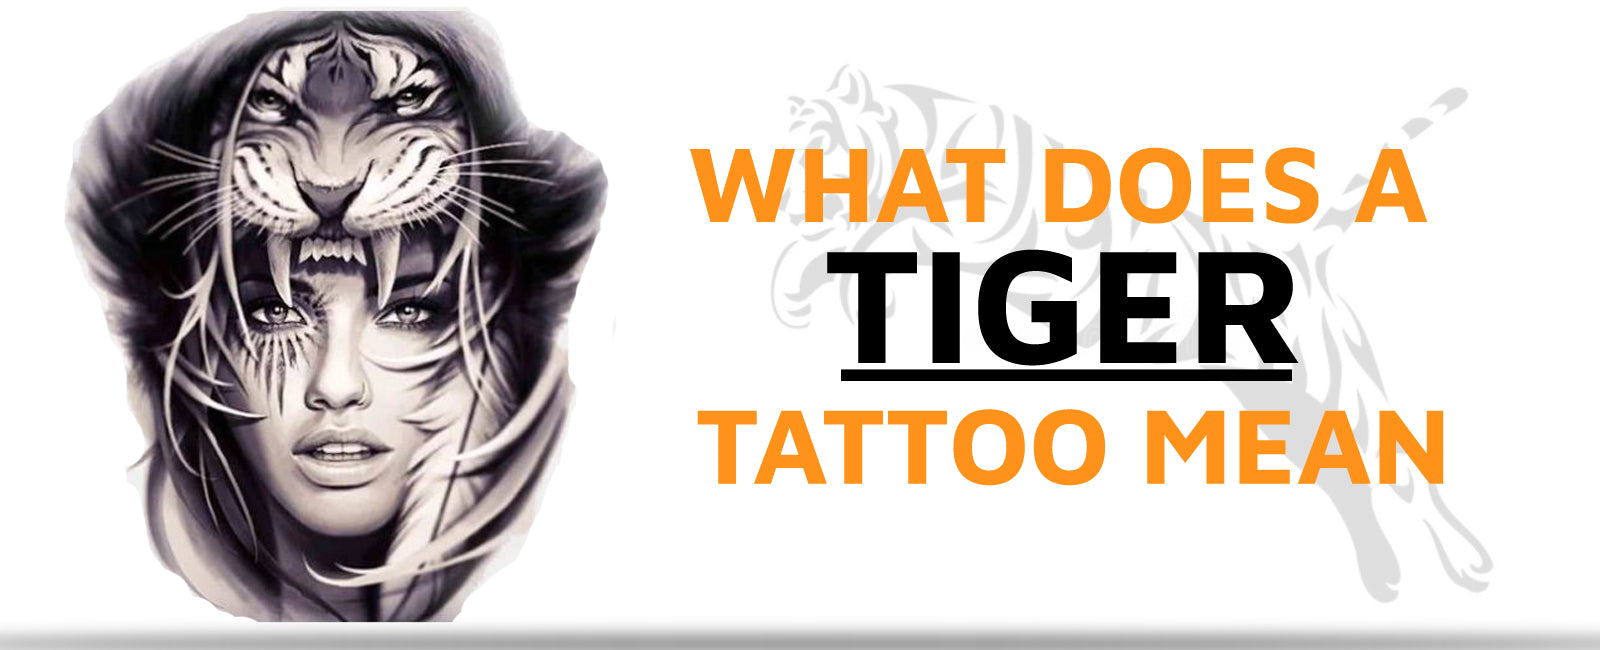 Buy Giant Temporary Tattoo Vintage Tattoos Tiger in Flames Motif Costume  Accessory Unisex Removable Tattoos Back Tattoos Costume Online in India -  Etsy